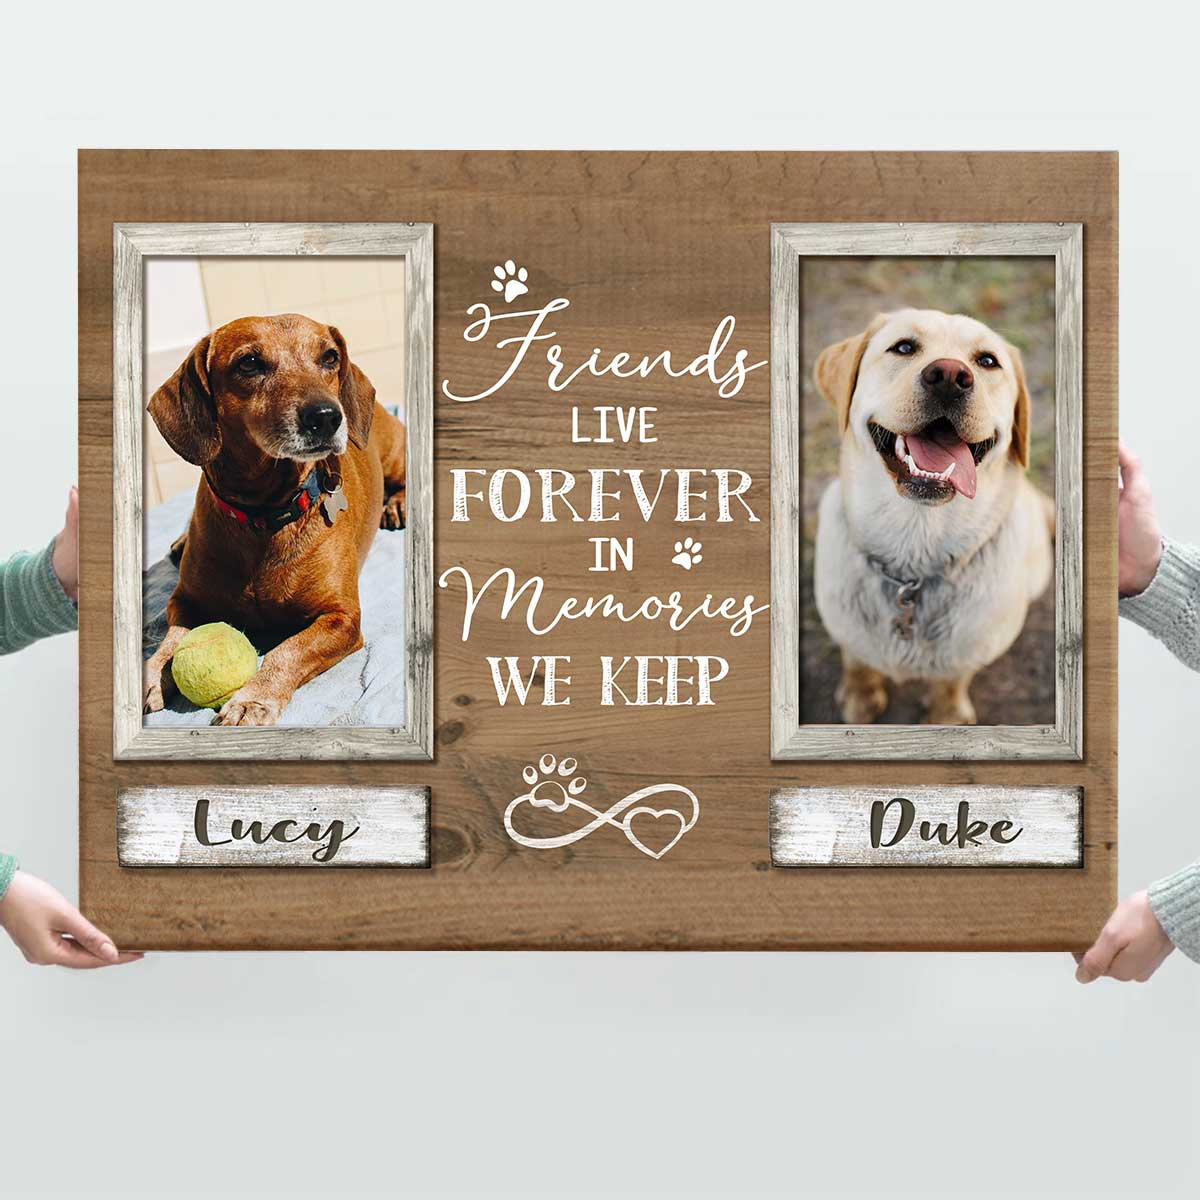 Personalized Pet Memorial Frame With Dog's Or Cat's Name